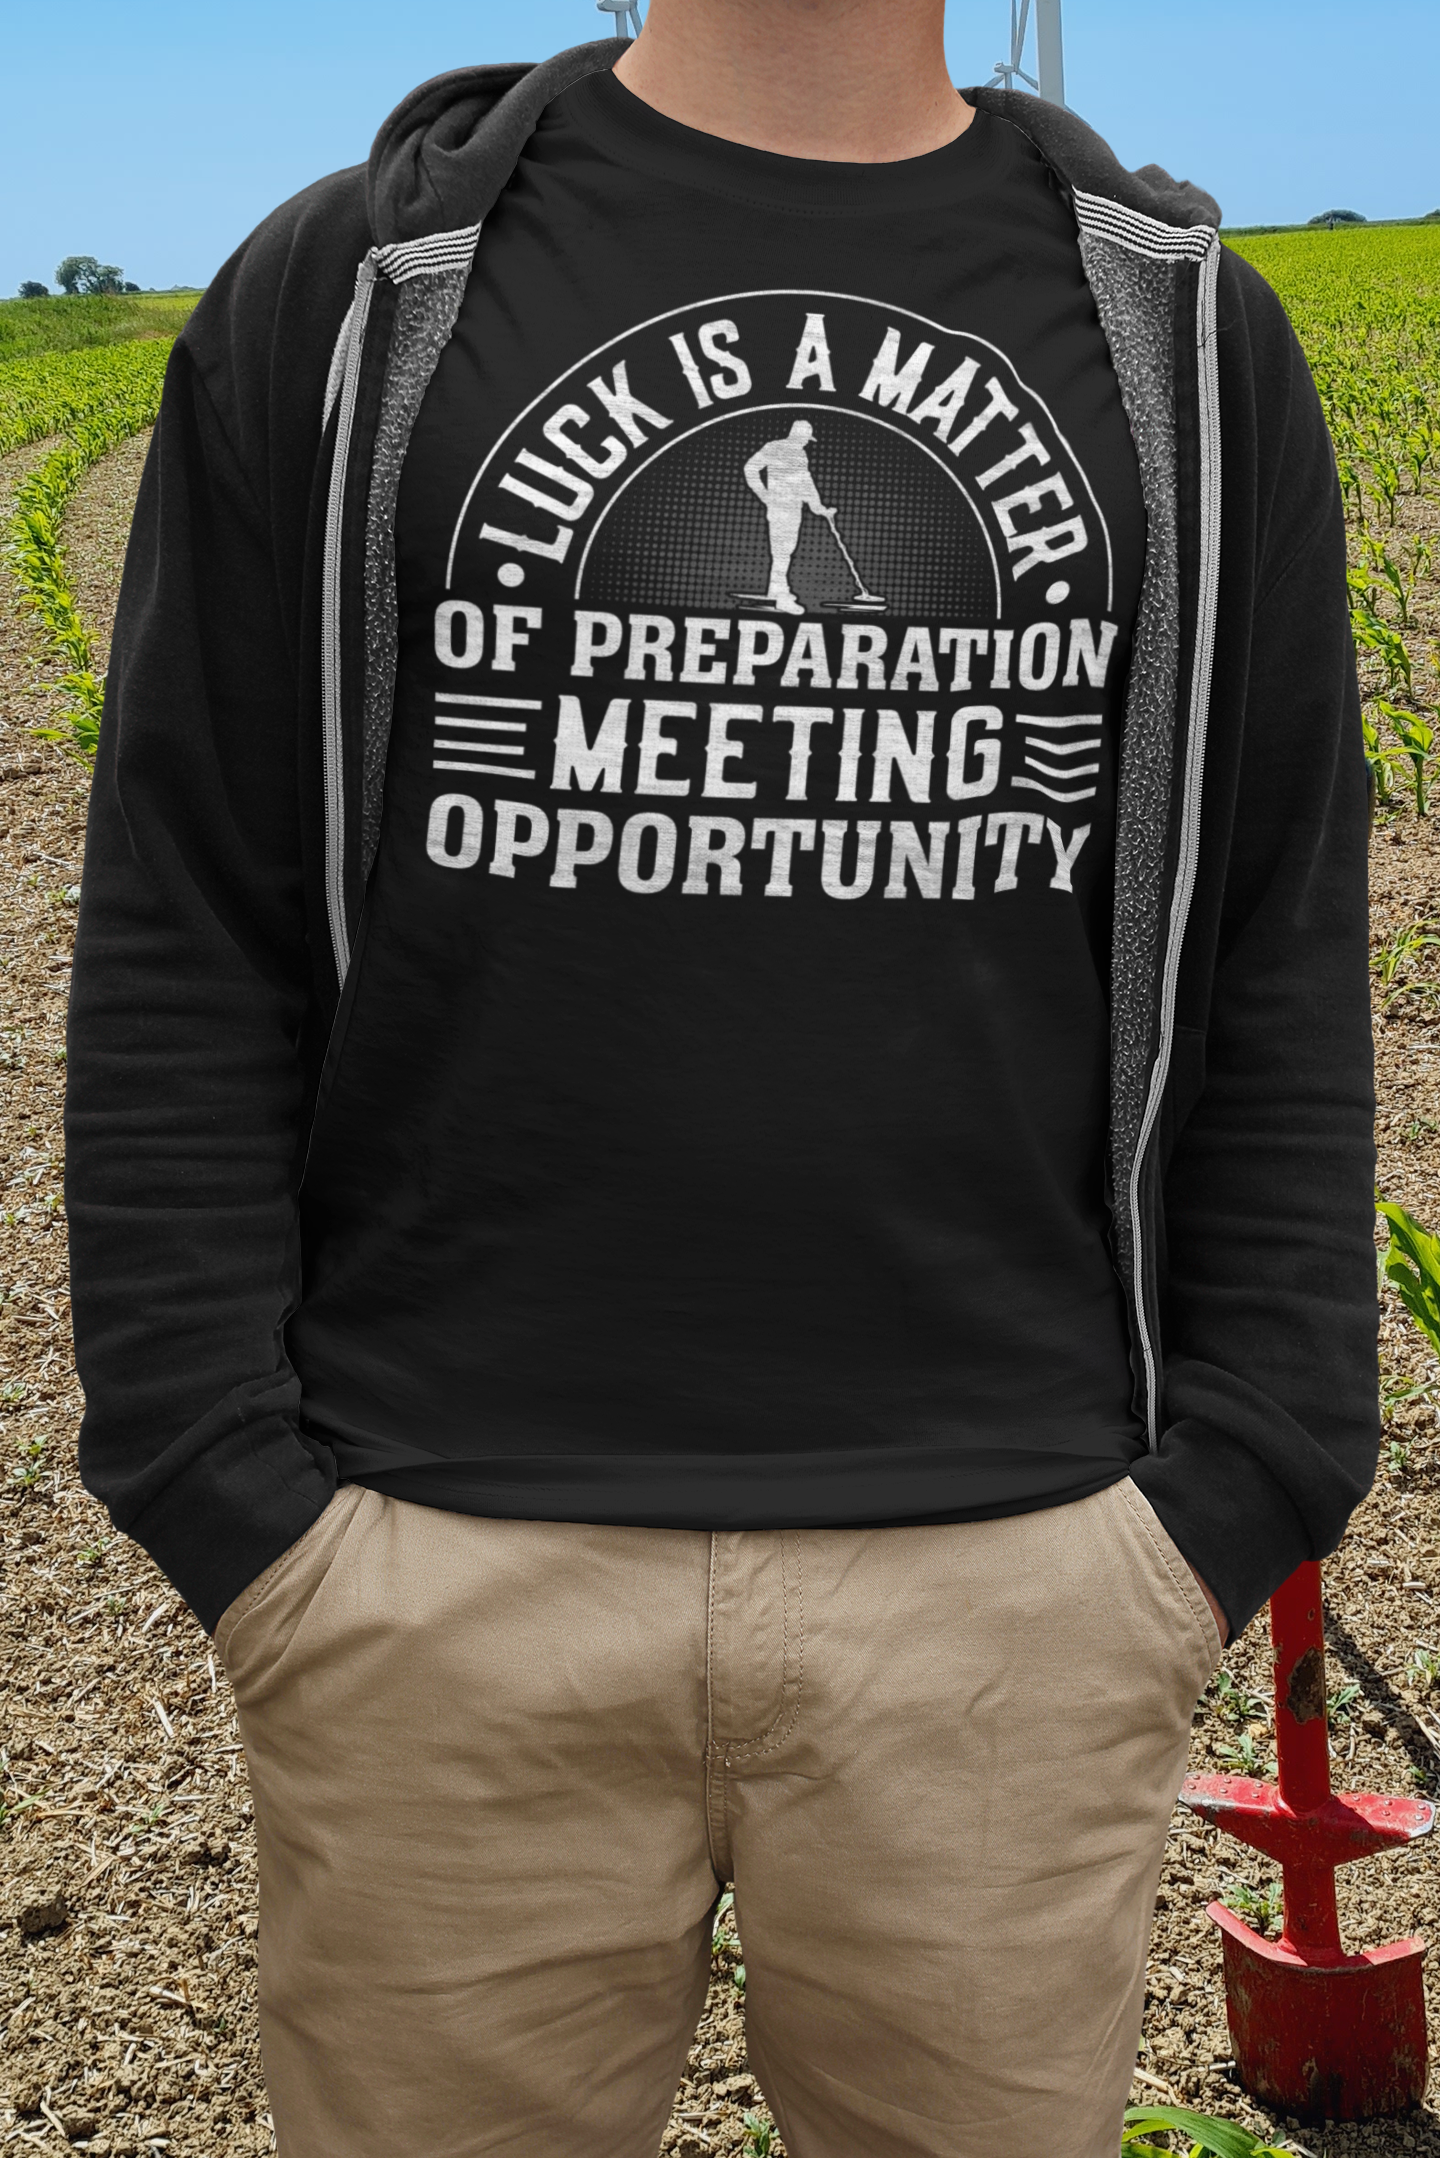 Luck is a matter of preparation meeting opportunity